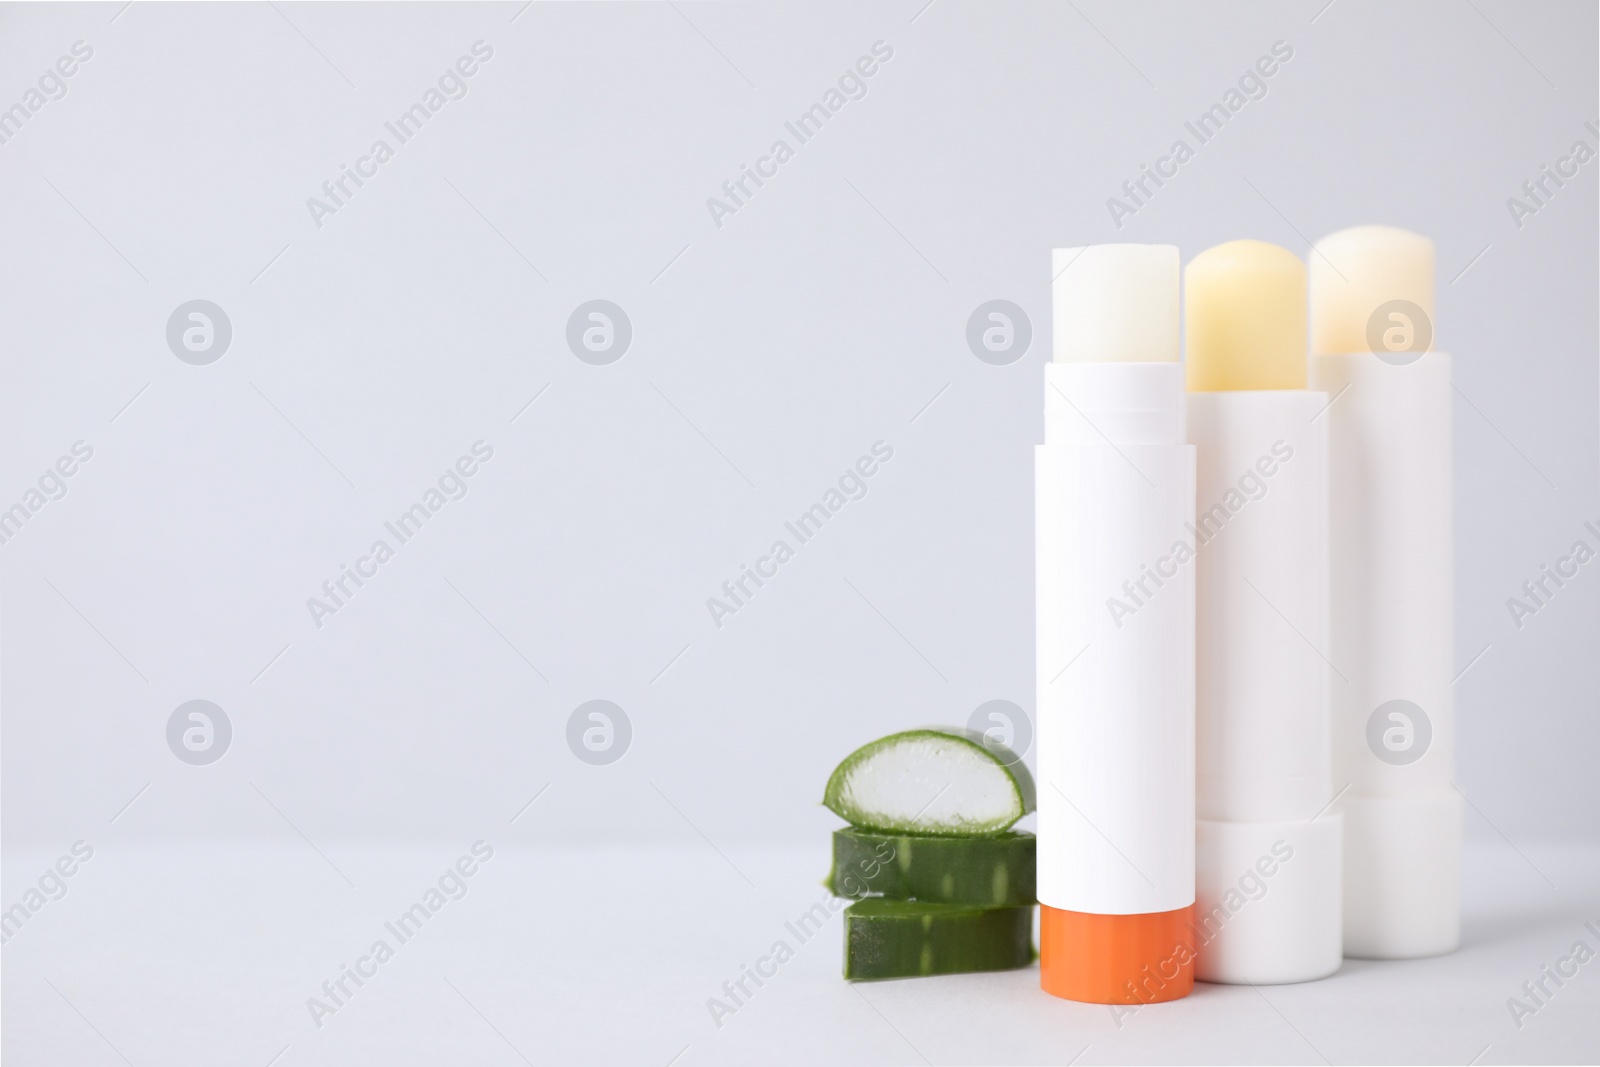 Photo of Hygienic lipsticks and cut aloe vera leaf on light table, space for text